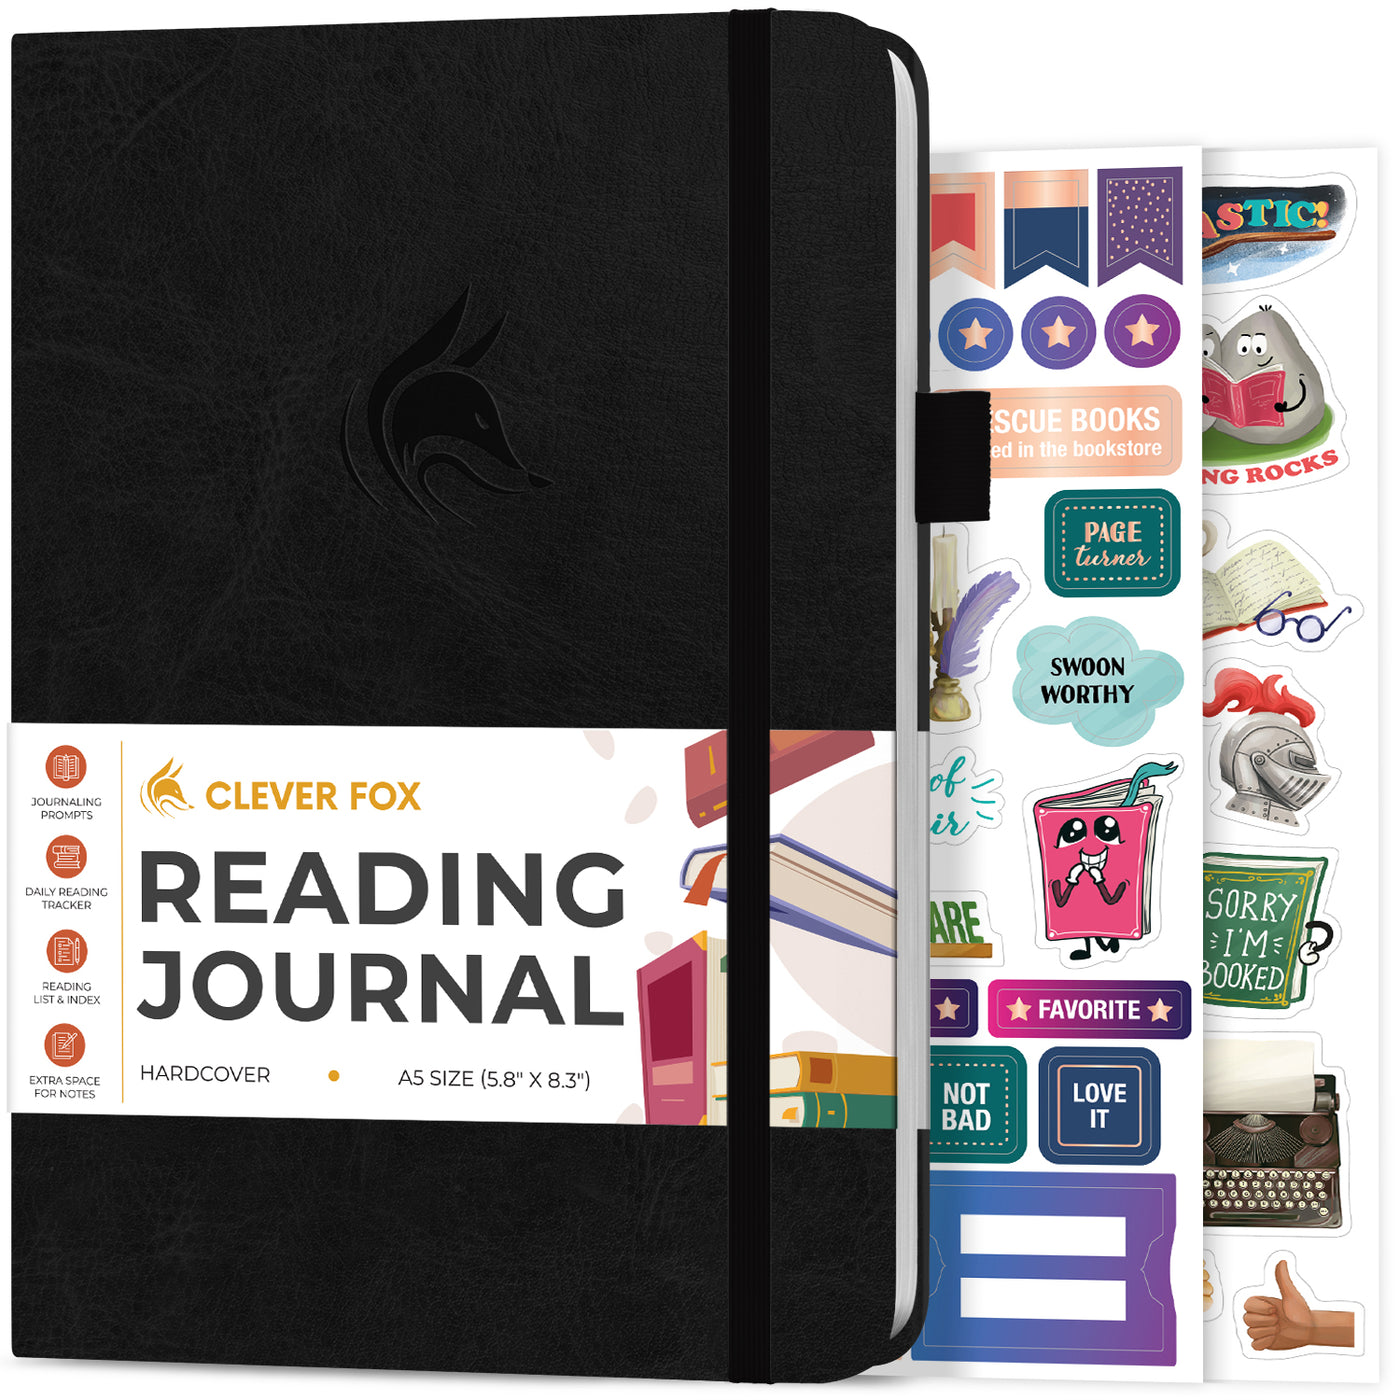 The Number 1 Best Digital Reading Journal Every Reader Needs - The